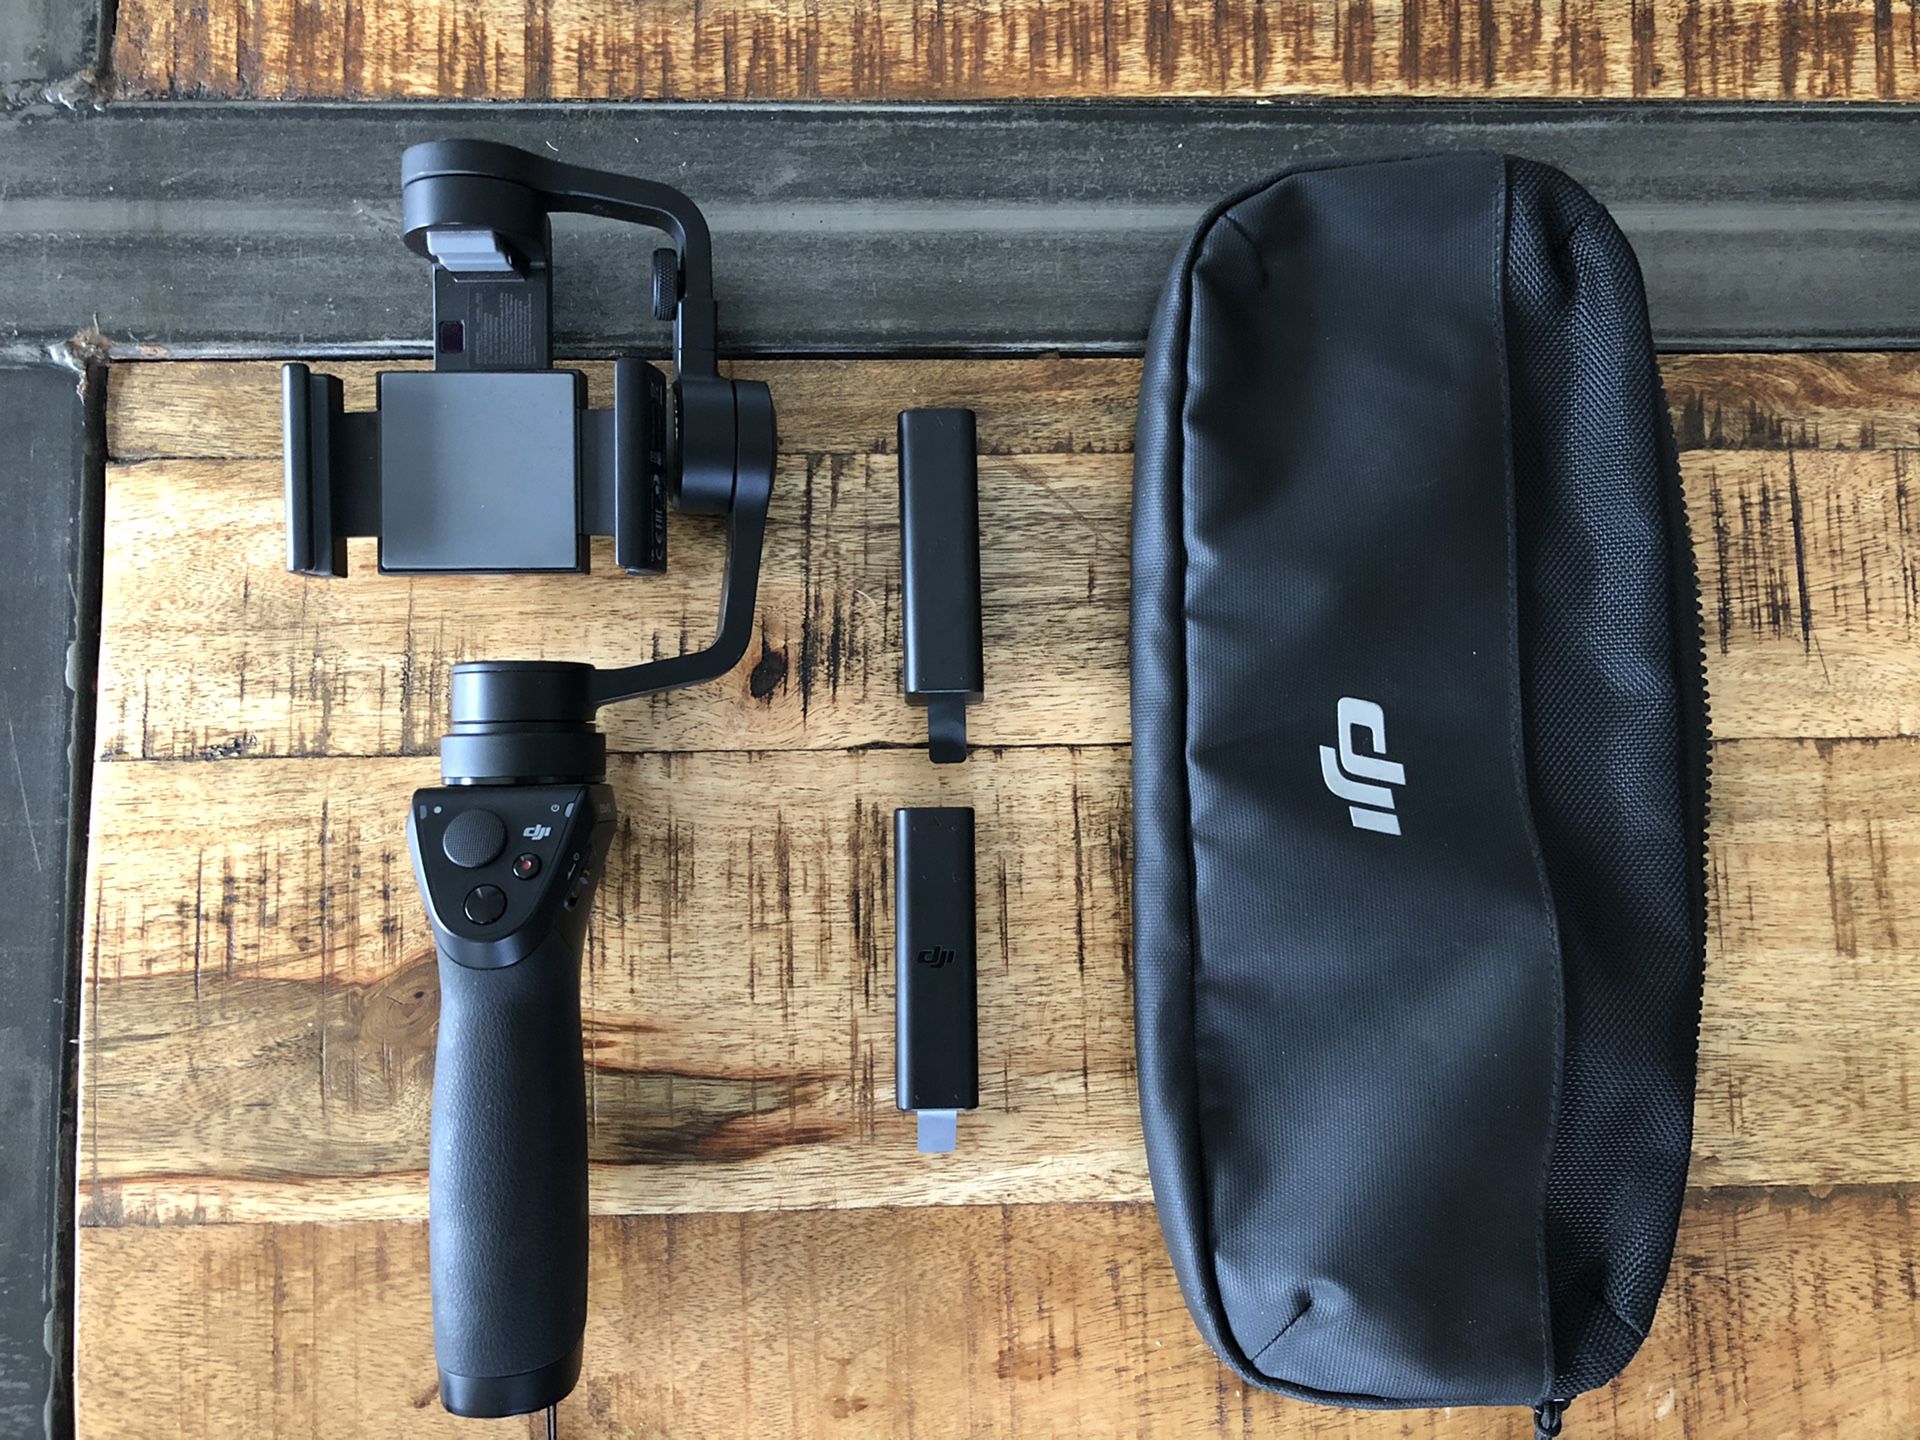 Dji Osmo Mobile - extra battery